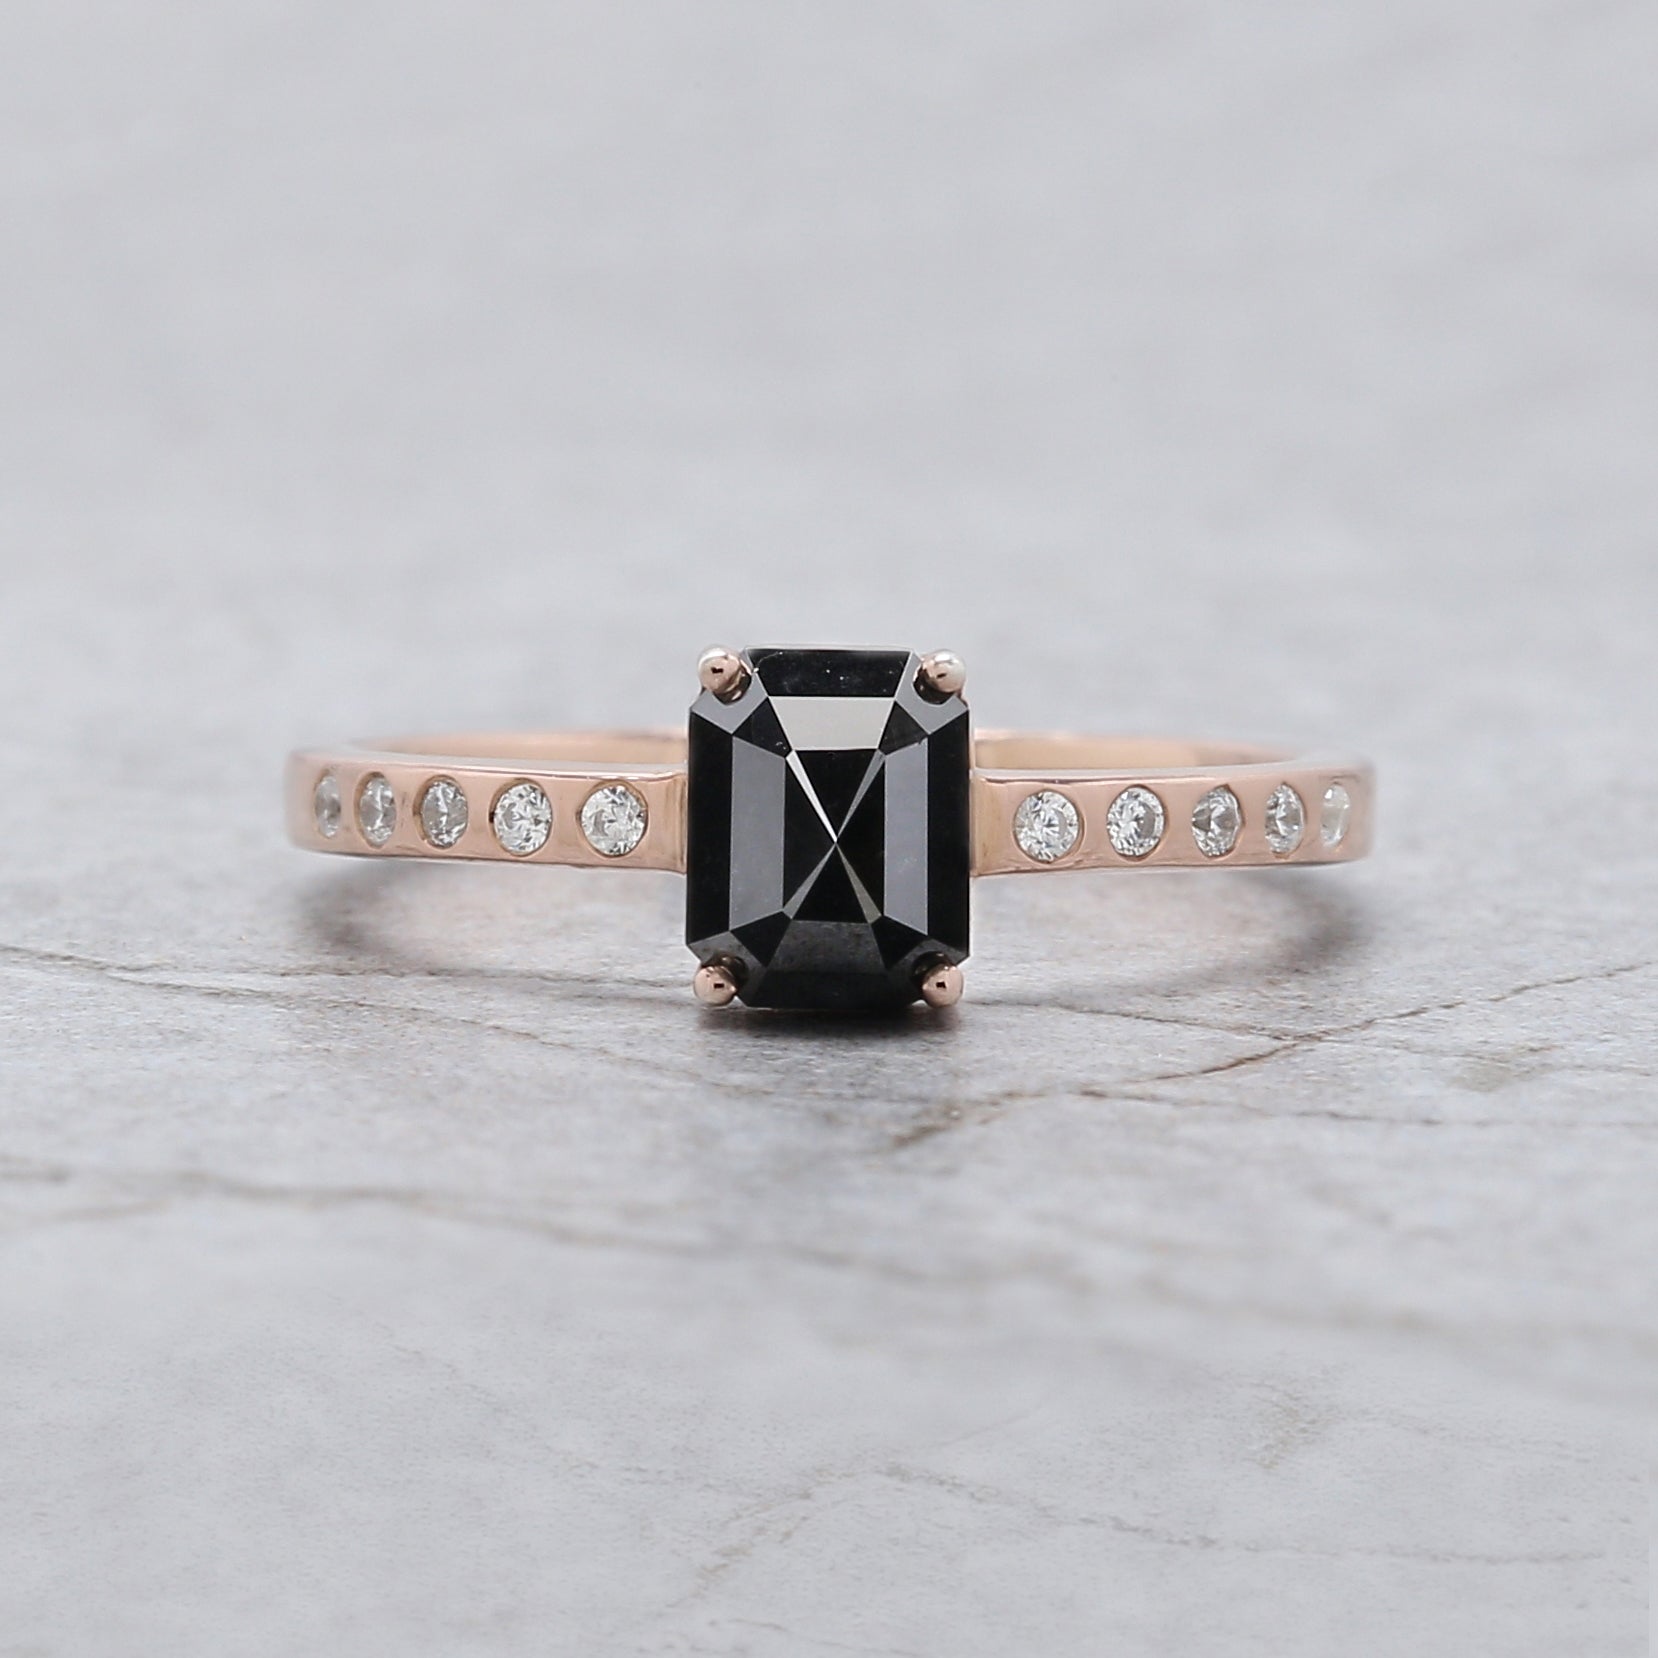 Emerald Cut Black Color Diamond Ring 1.07 Ct 6.26 MM Emerald Diamond Ring 14K Solid Rose Gold Silver Engagement Ring Gift For Her QL2217